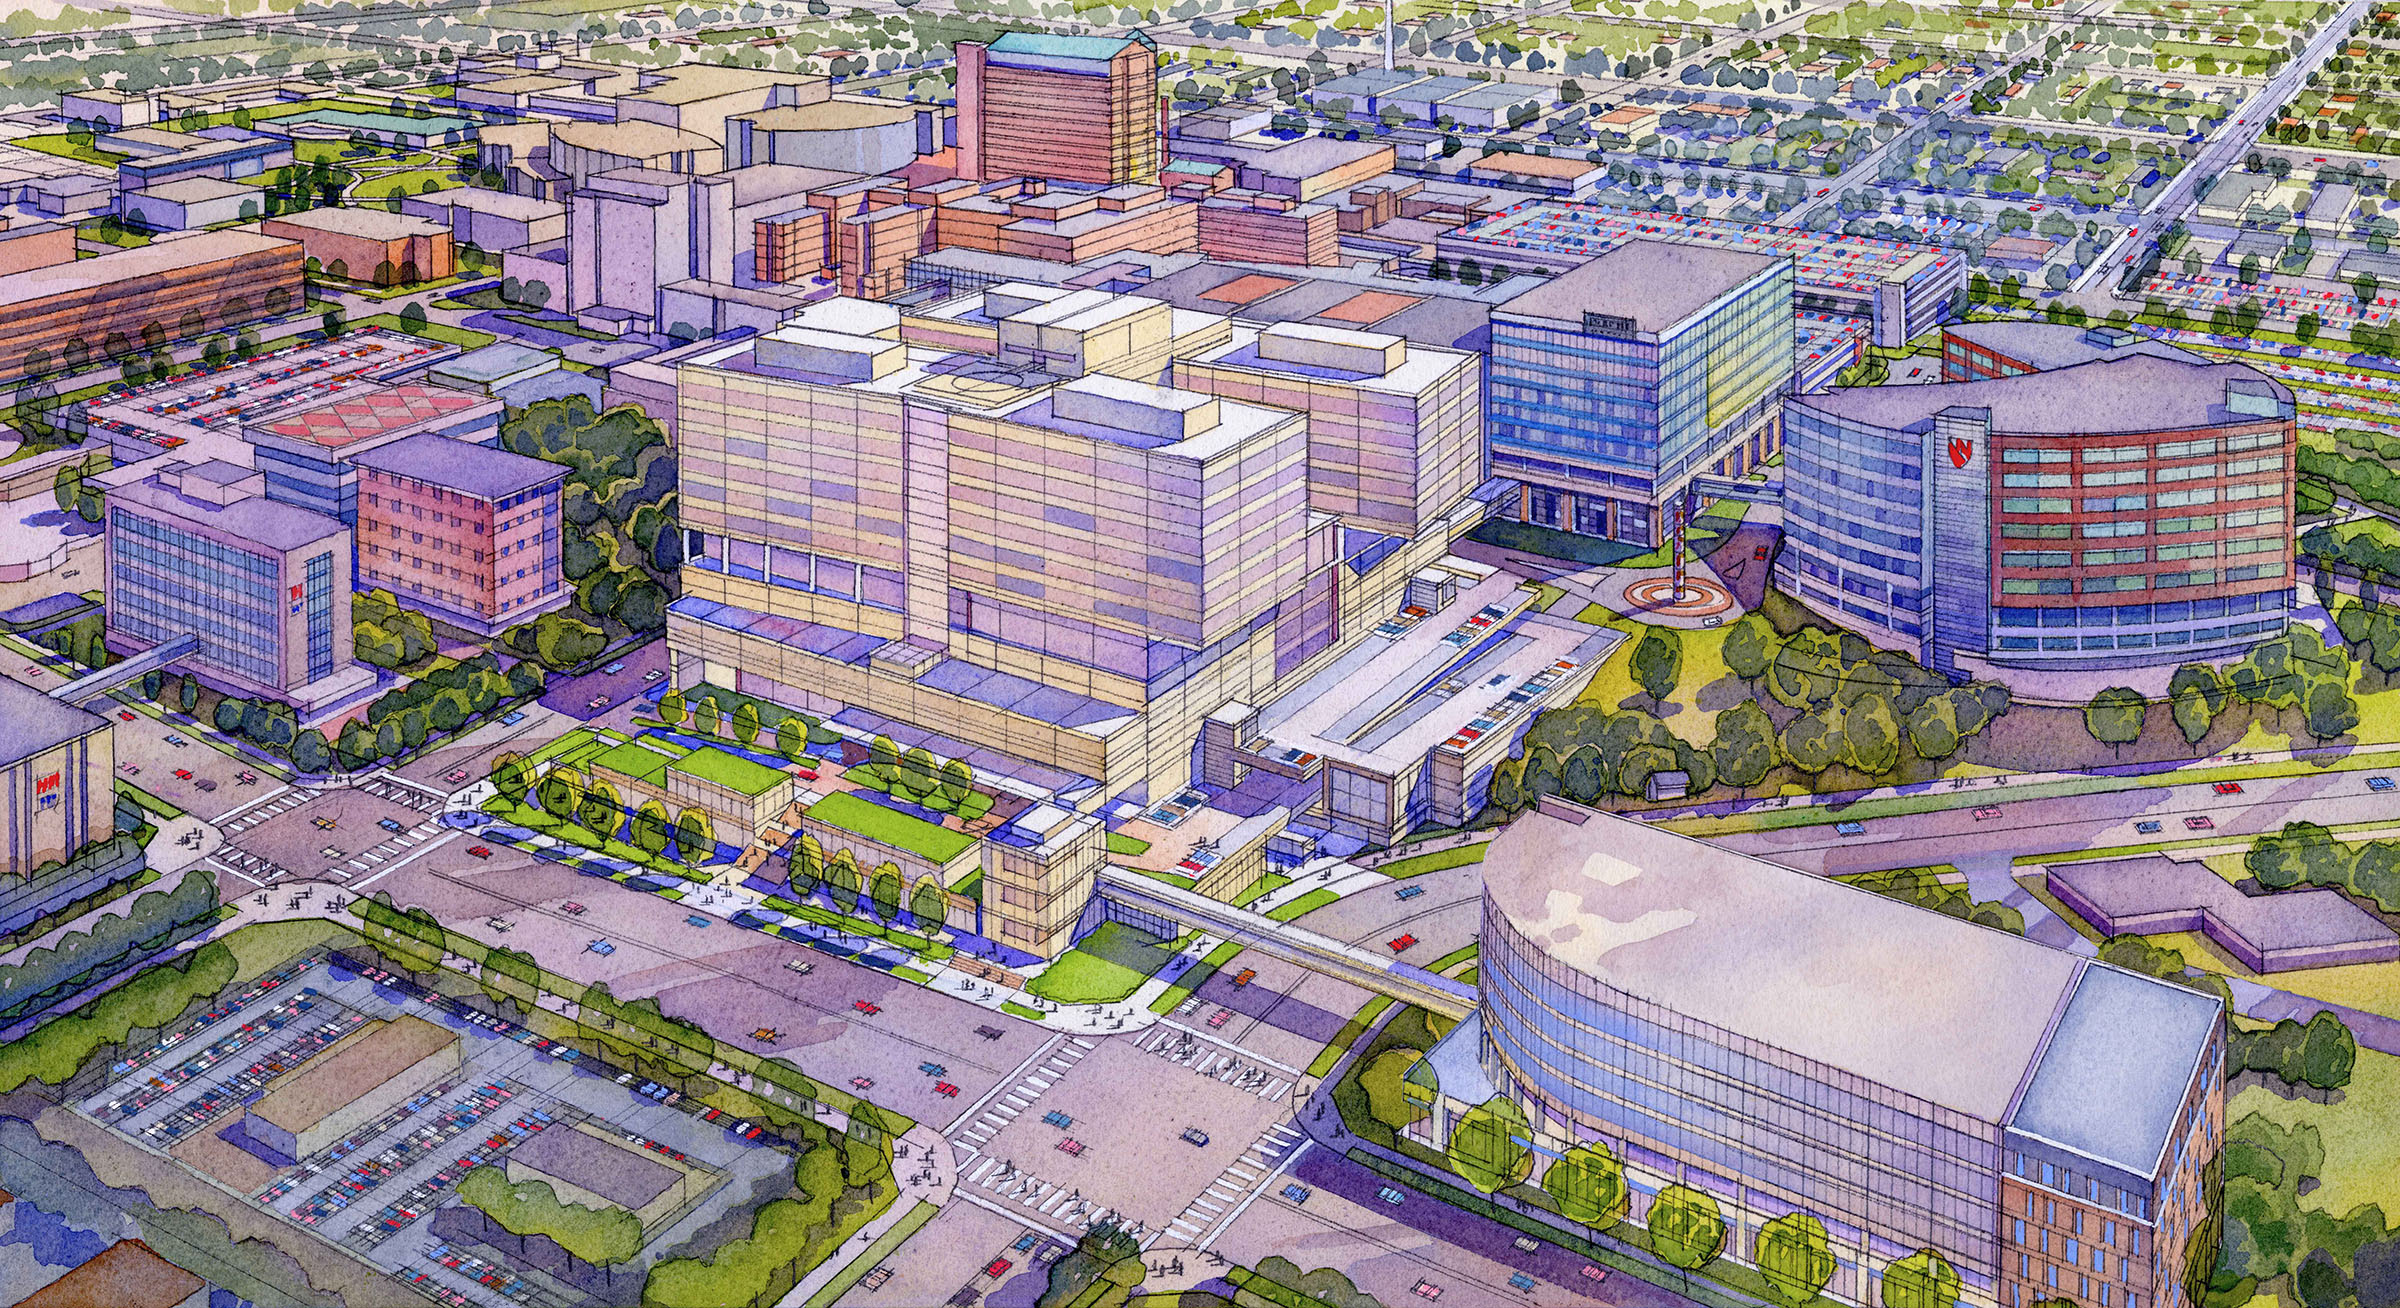 A rendering of the Project Health project at the corner of Farnam Street and Saddle Creek Road